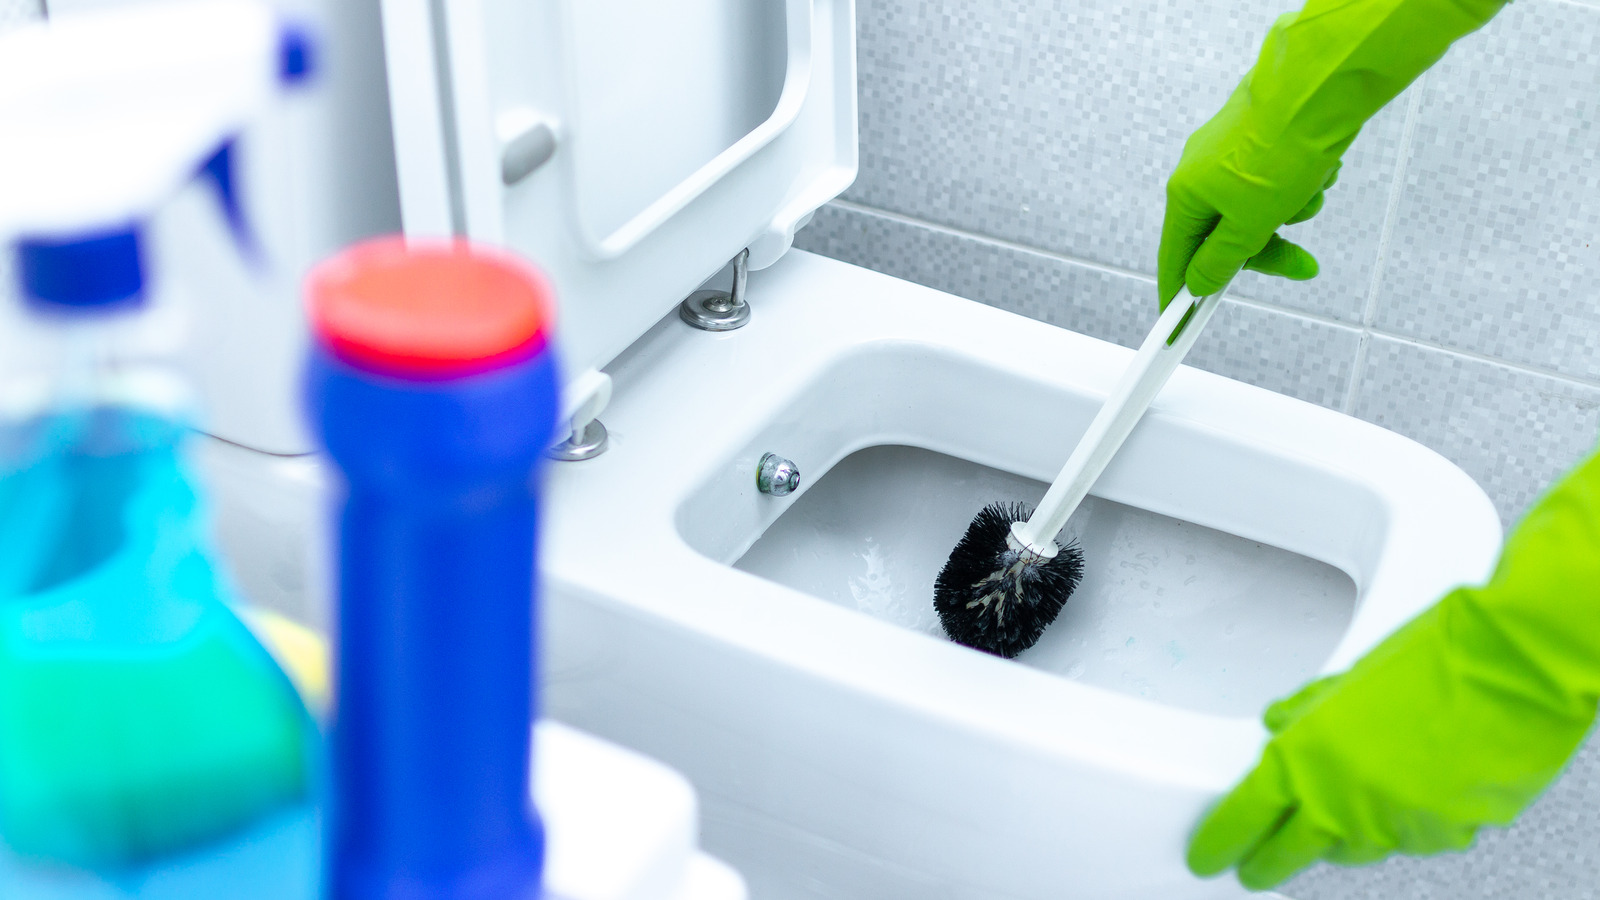 https://www.healthdigest.com/img/gallery/cleaning-your-toilet-with-bleach-is-a-health-risk-if-you-make-this-mistake/l-intro-1692018052.jpg